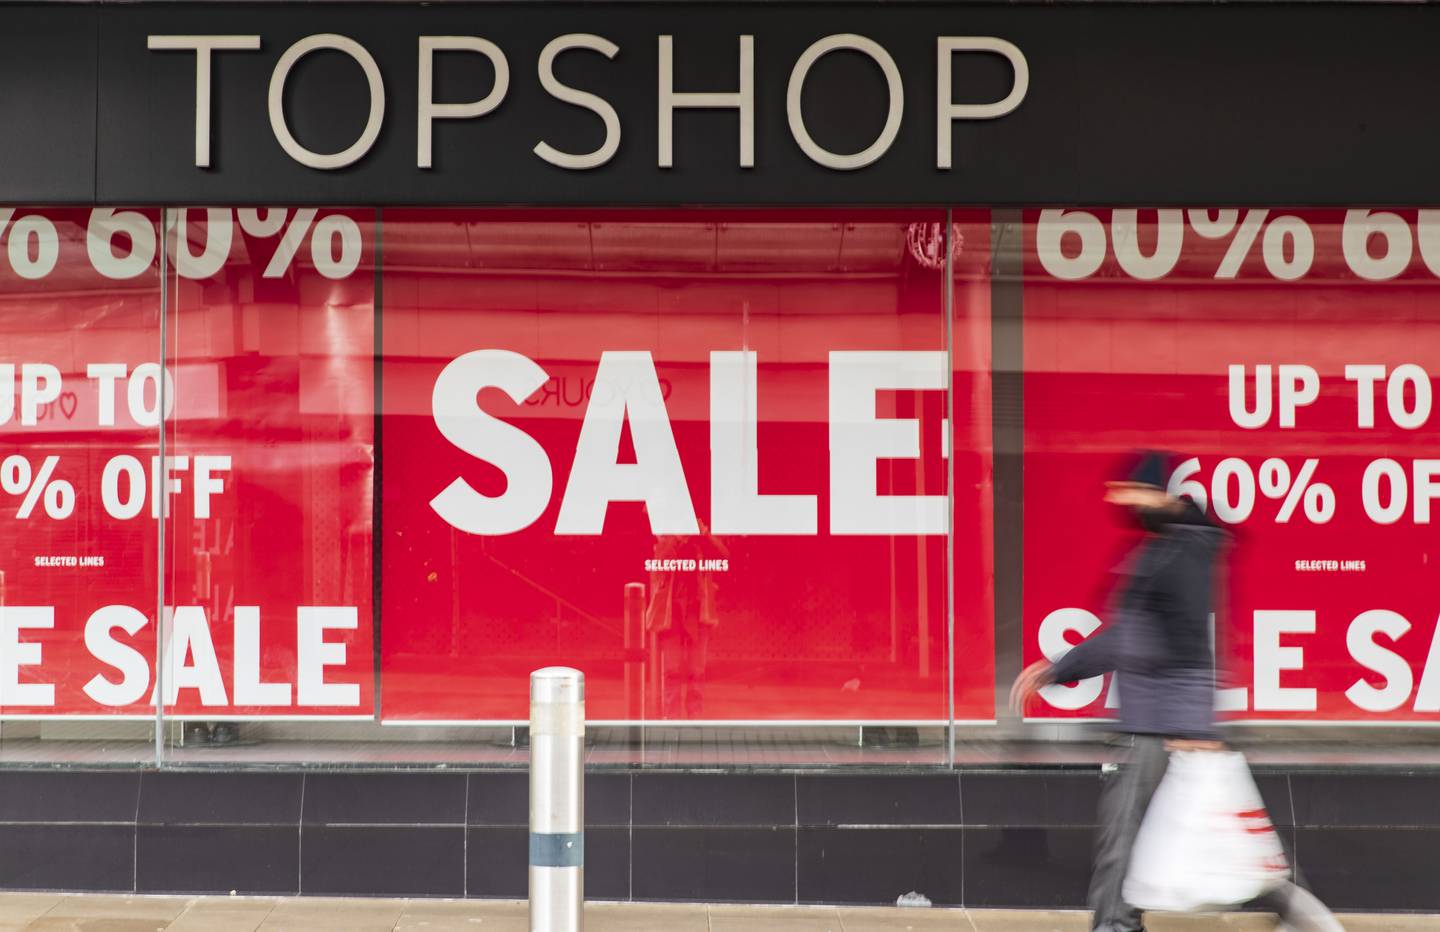 Topshop may find a buyer as soon as this week | Source: May James/SOPA Images/LightRocket via Getty Images